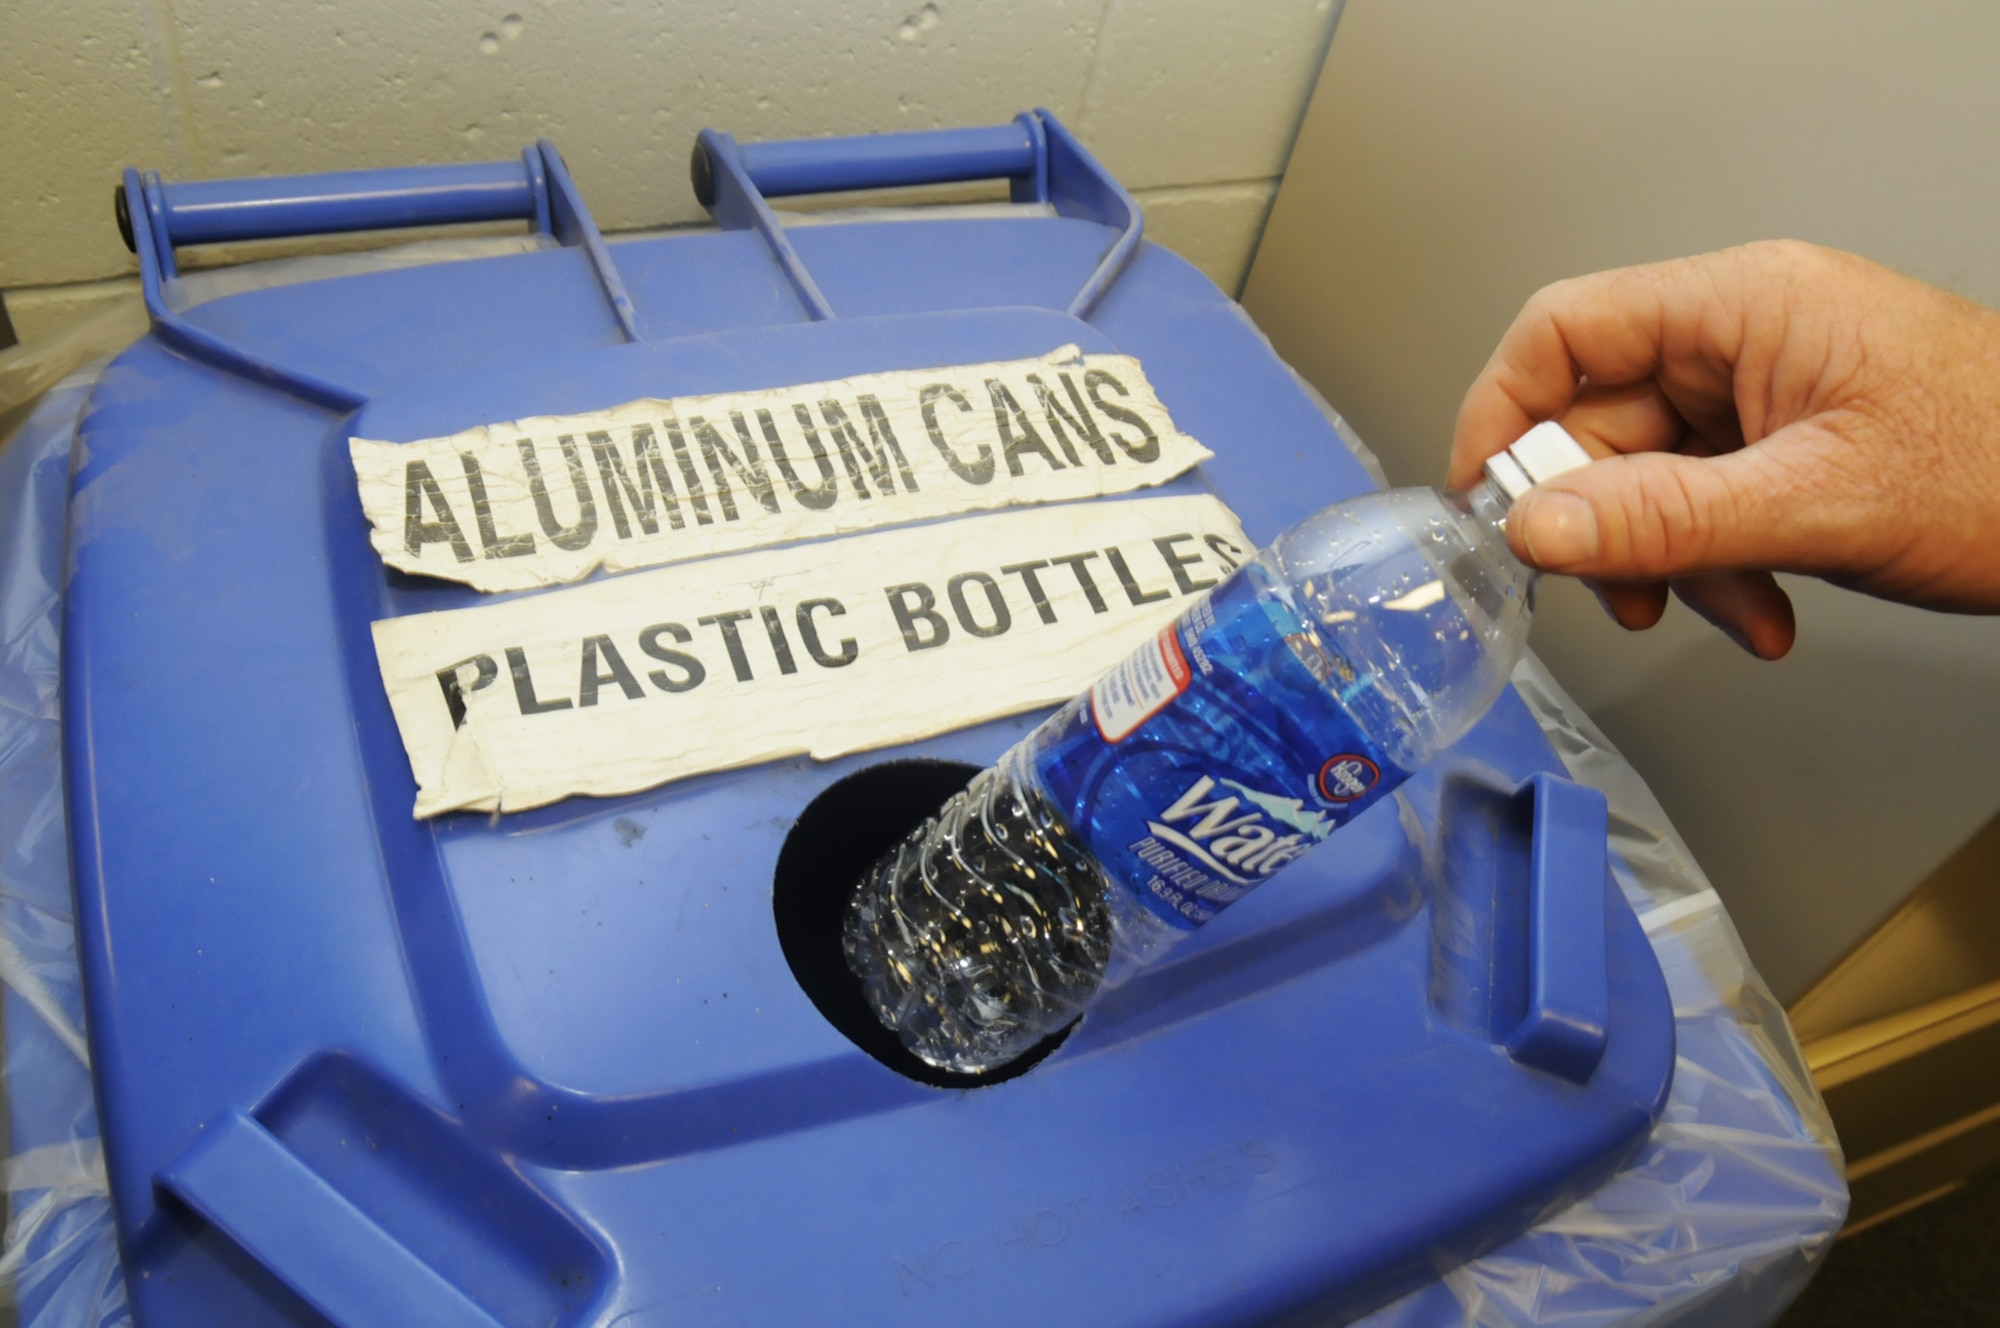 Aluminum cans may be placed in recycling containers along with plastic bottles. U. S. Air Force photo by Sue Sapp